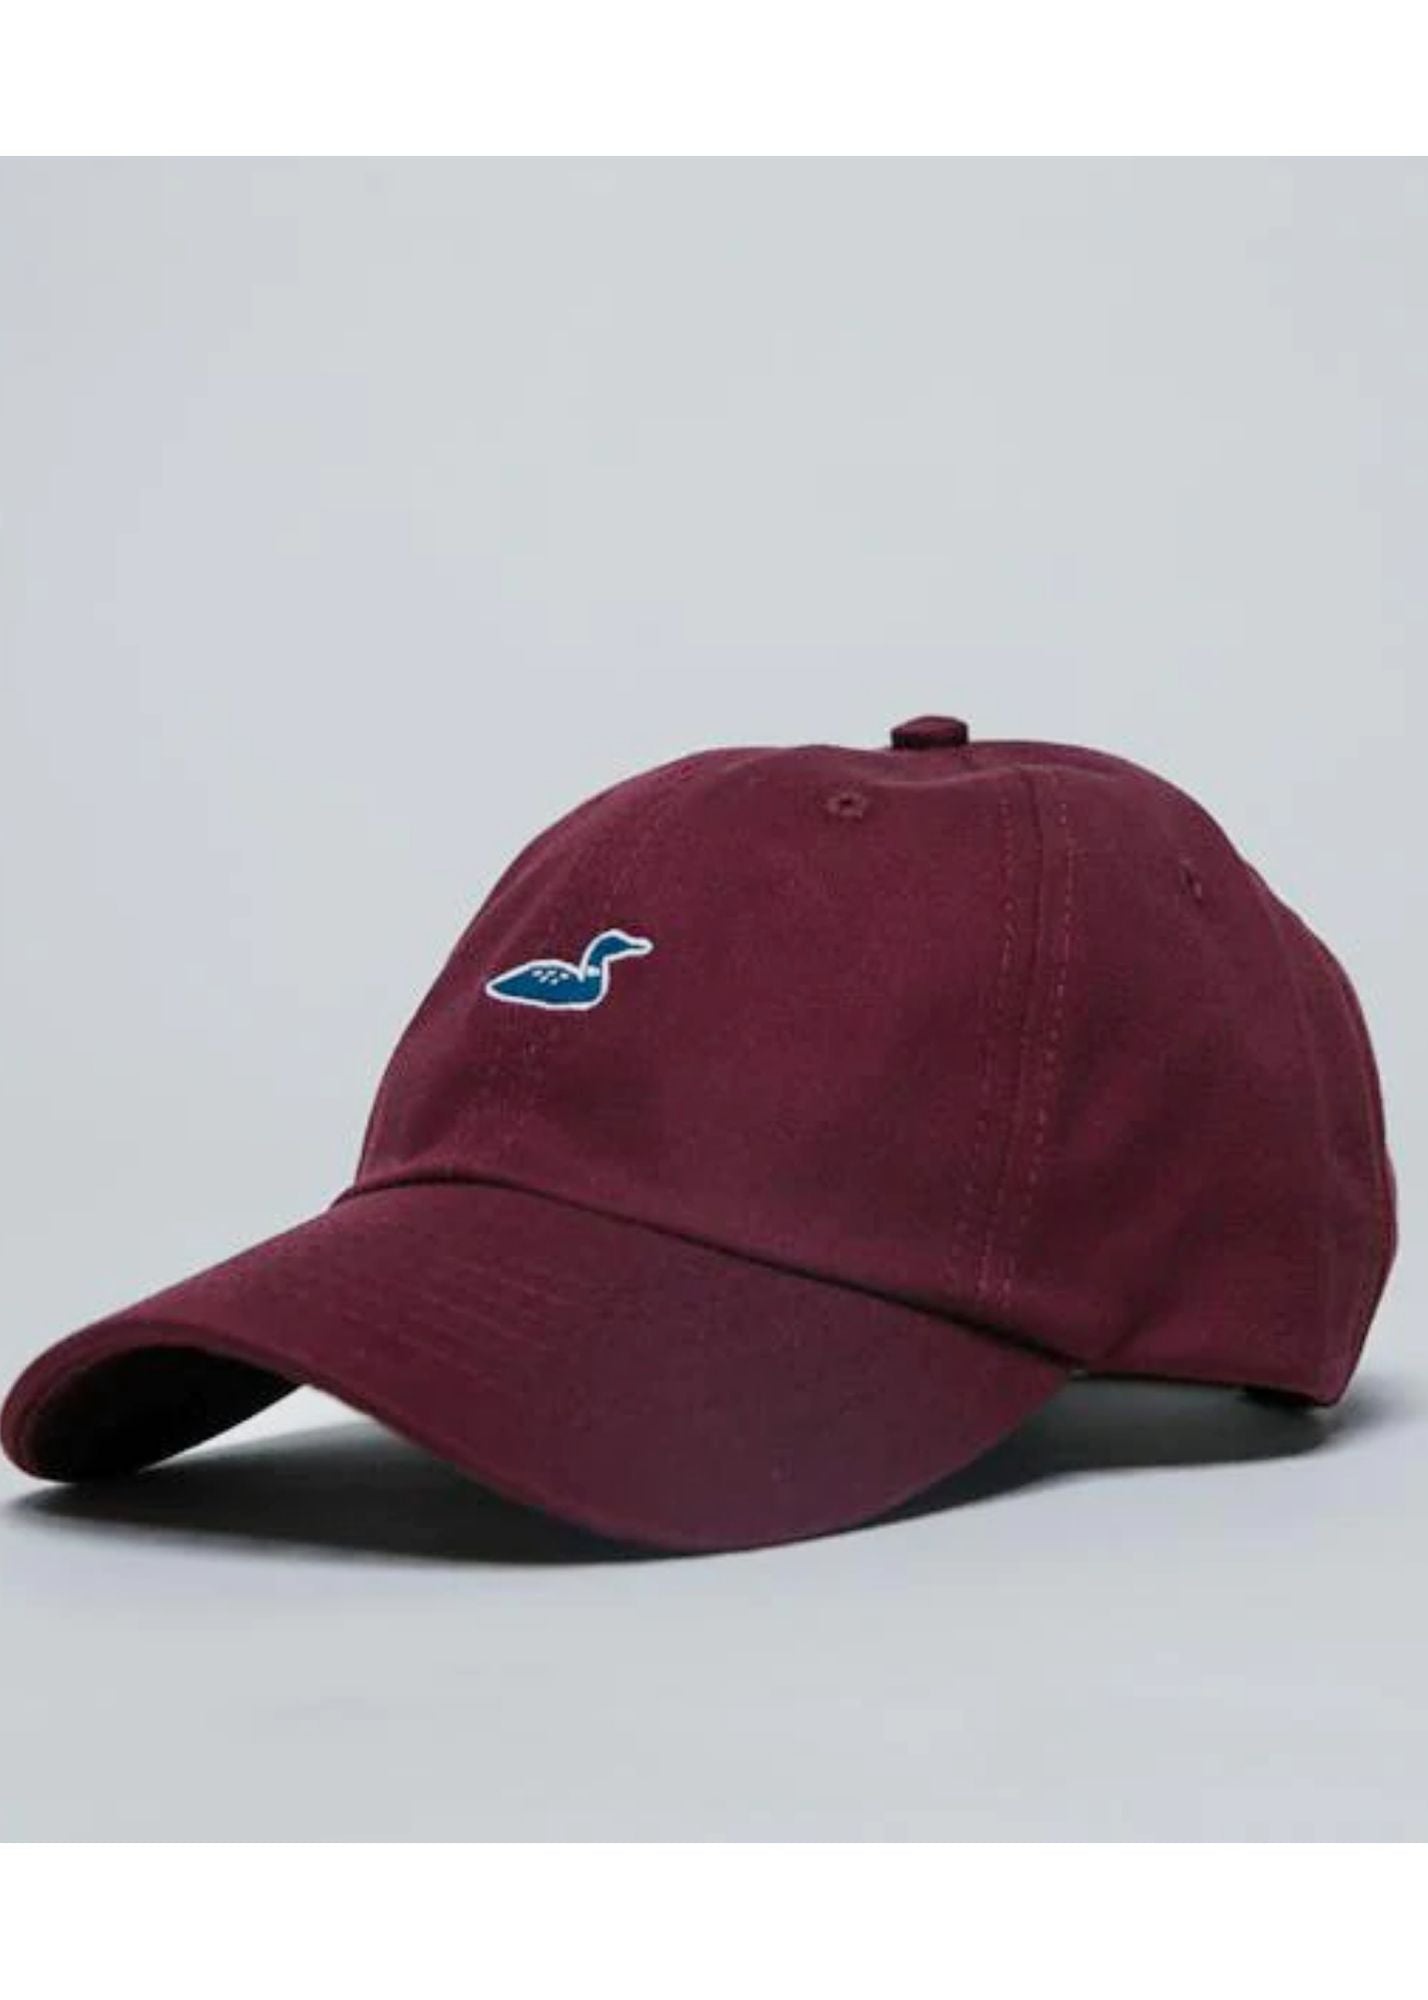 Embroidered Loon Ballcap Hat Accessories